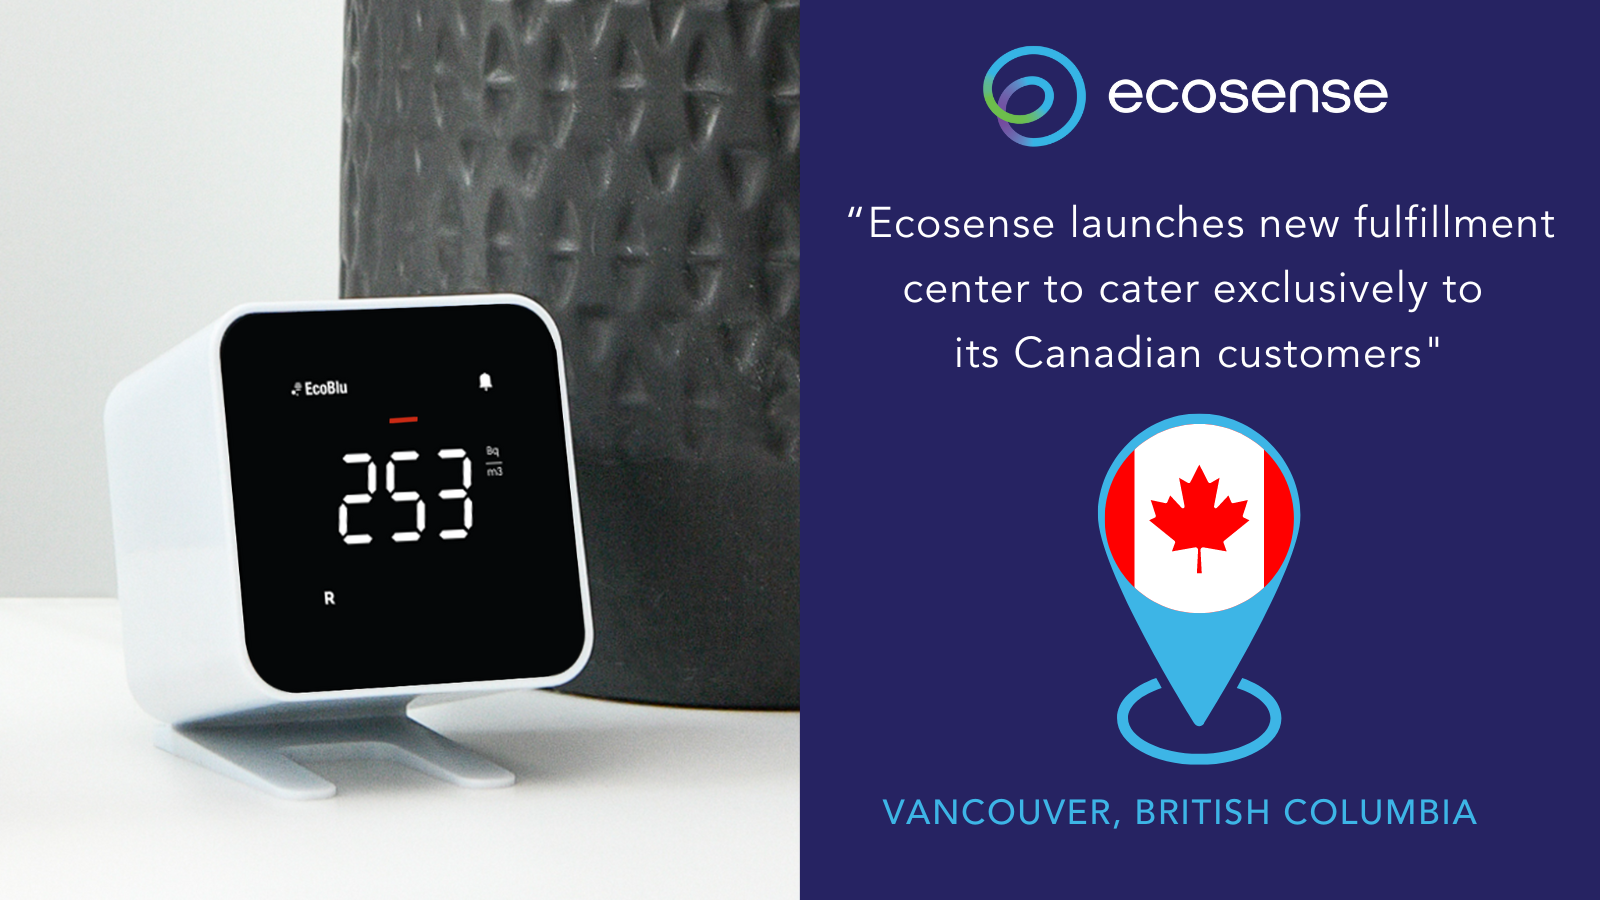 Ecosense, the Leader in Radon Detection and Monitoring, Launches Fulfillment Center in Canada to Better Serve Customers